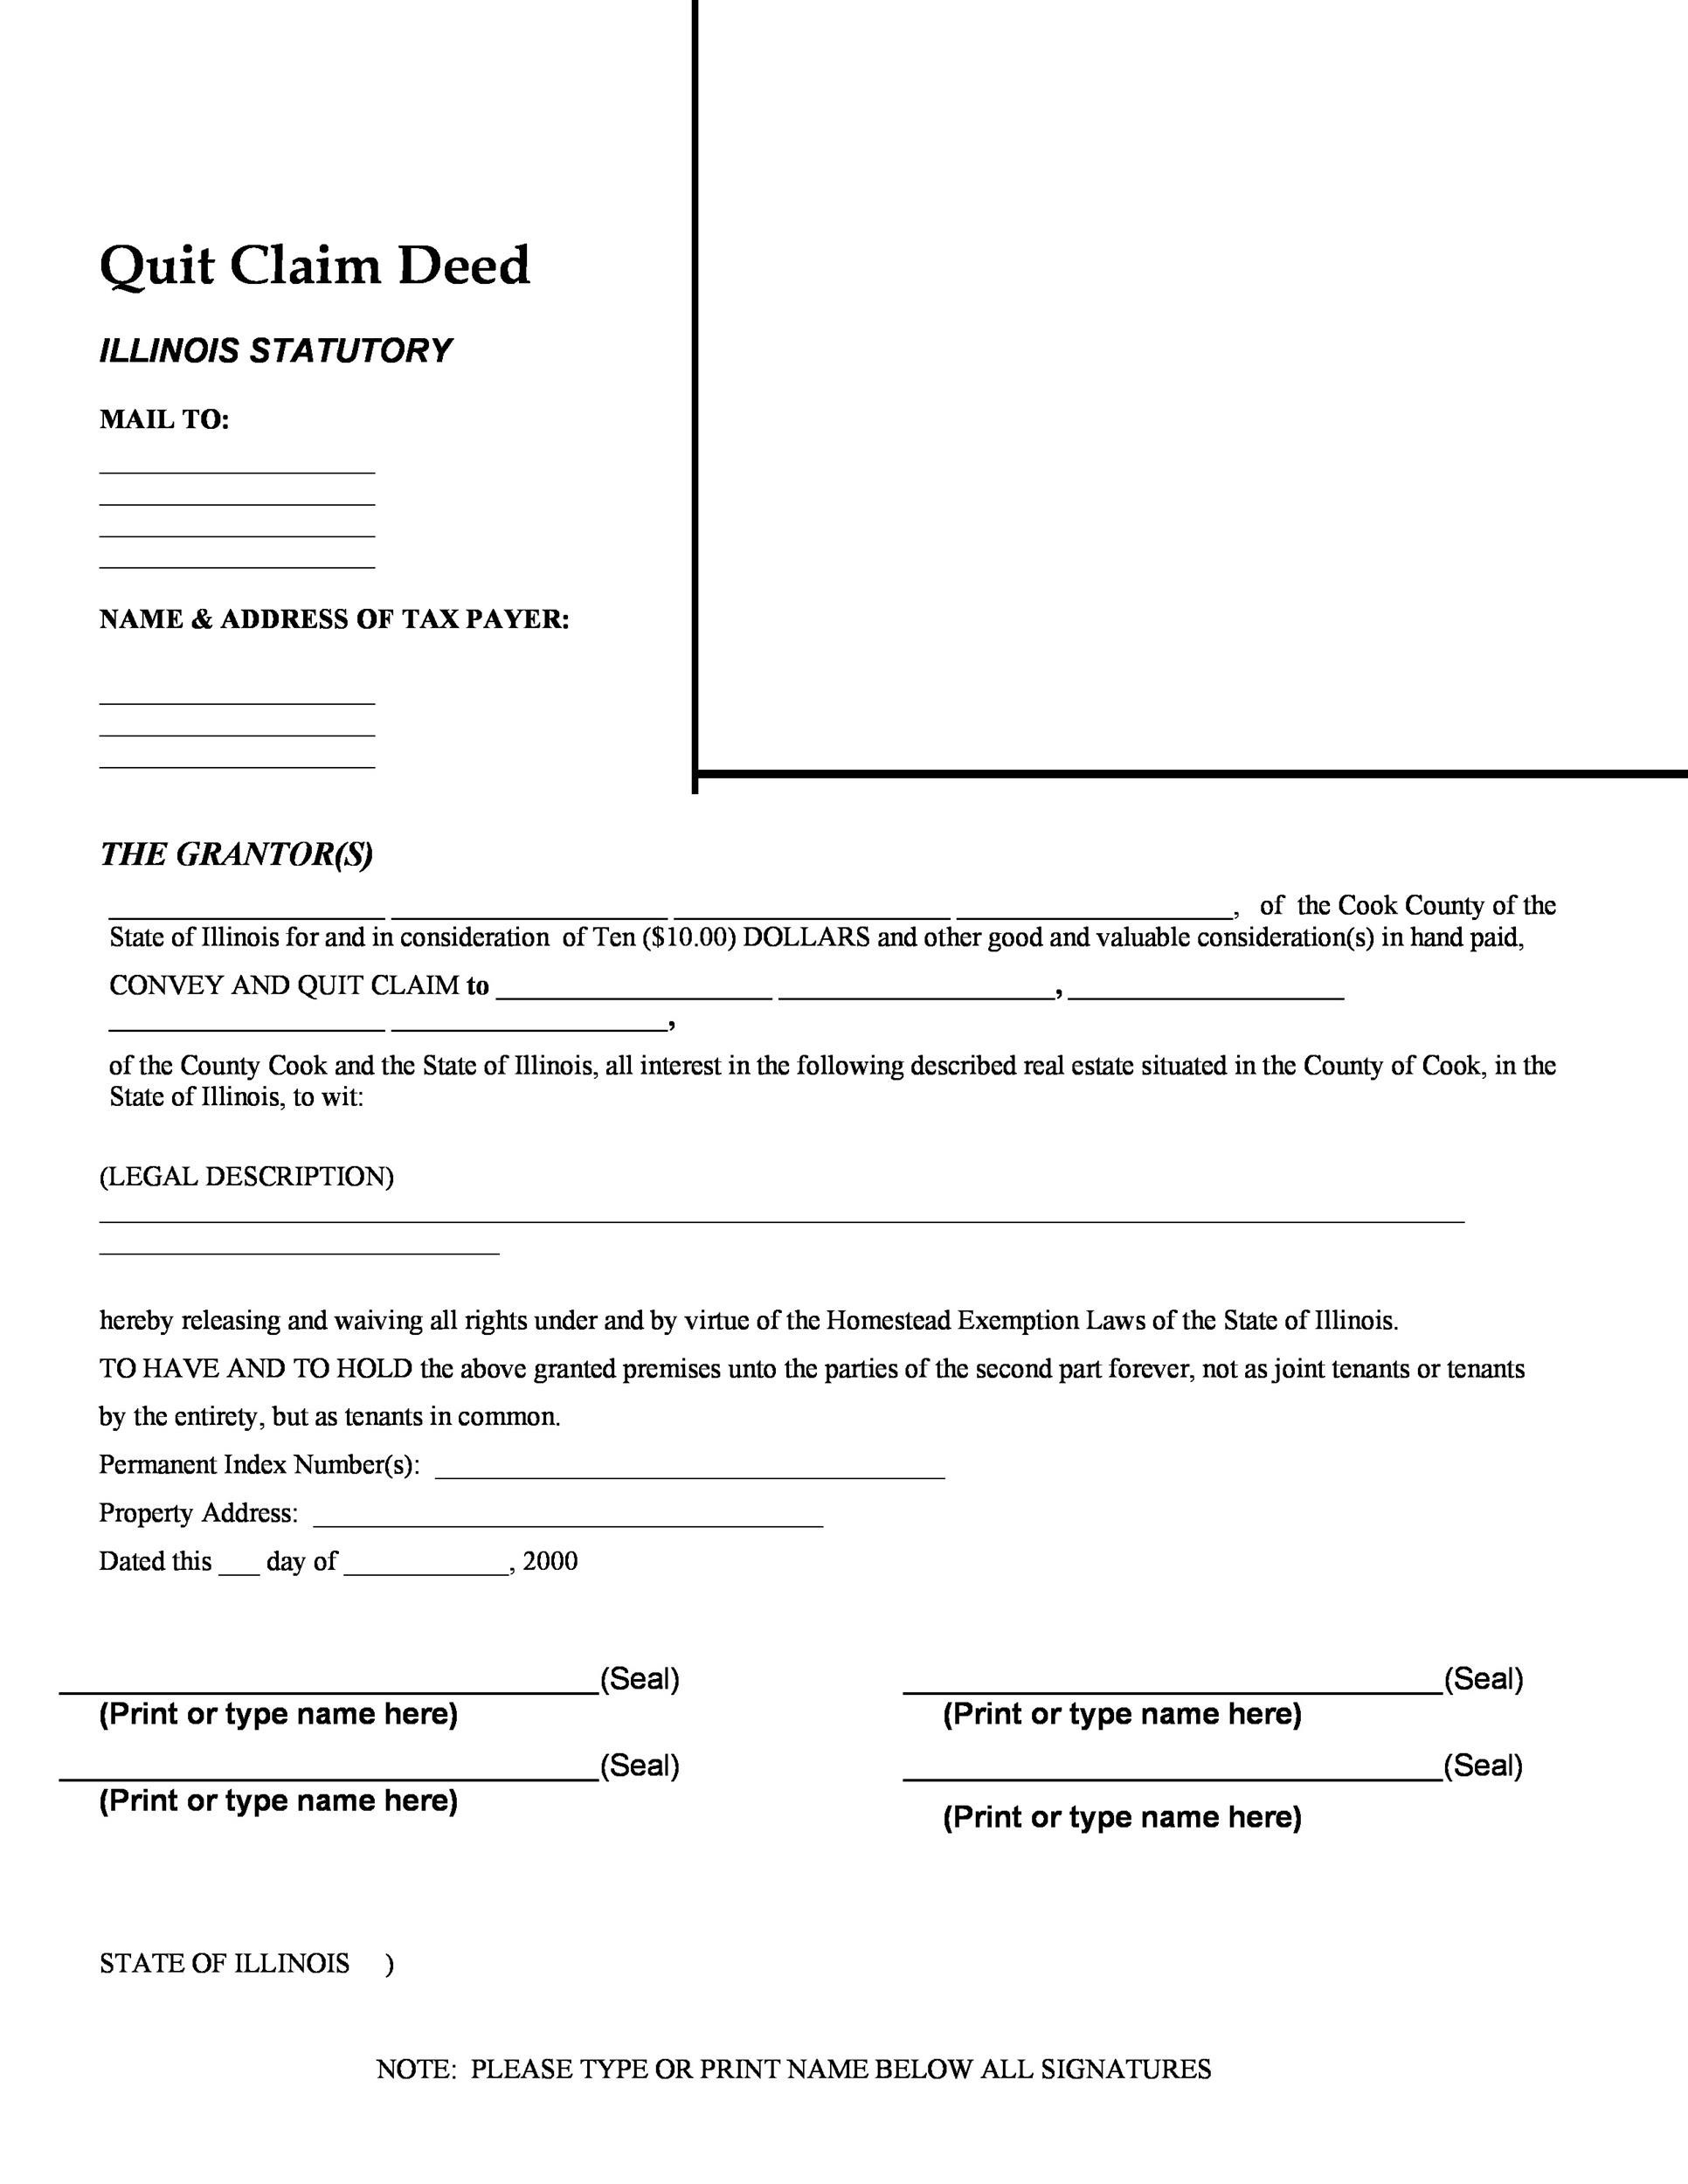 46 Free Quit Claim Deed Forms & Templates ᐅ TemplateLab